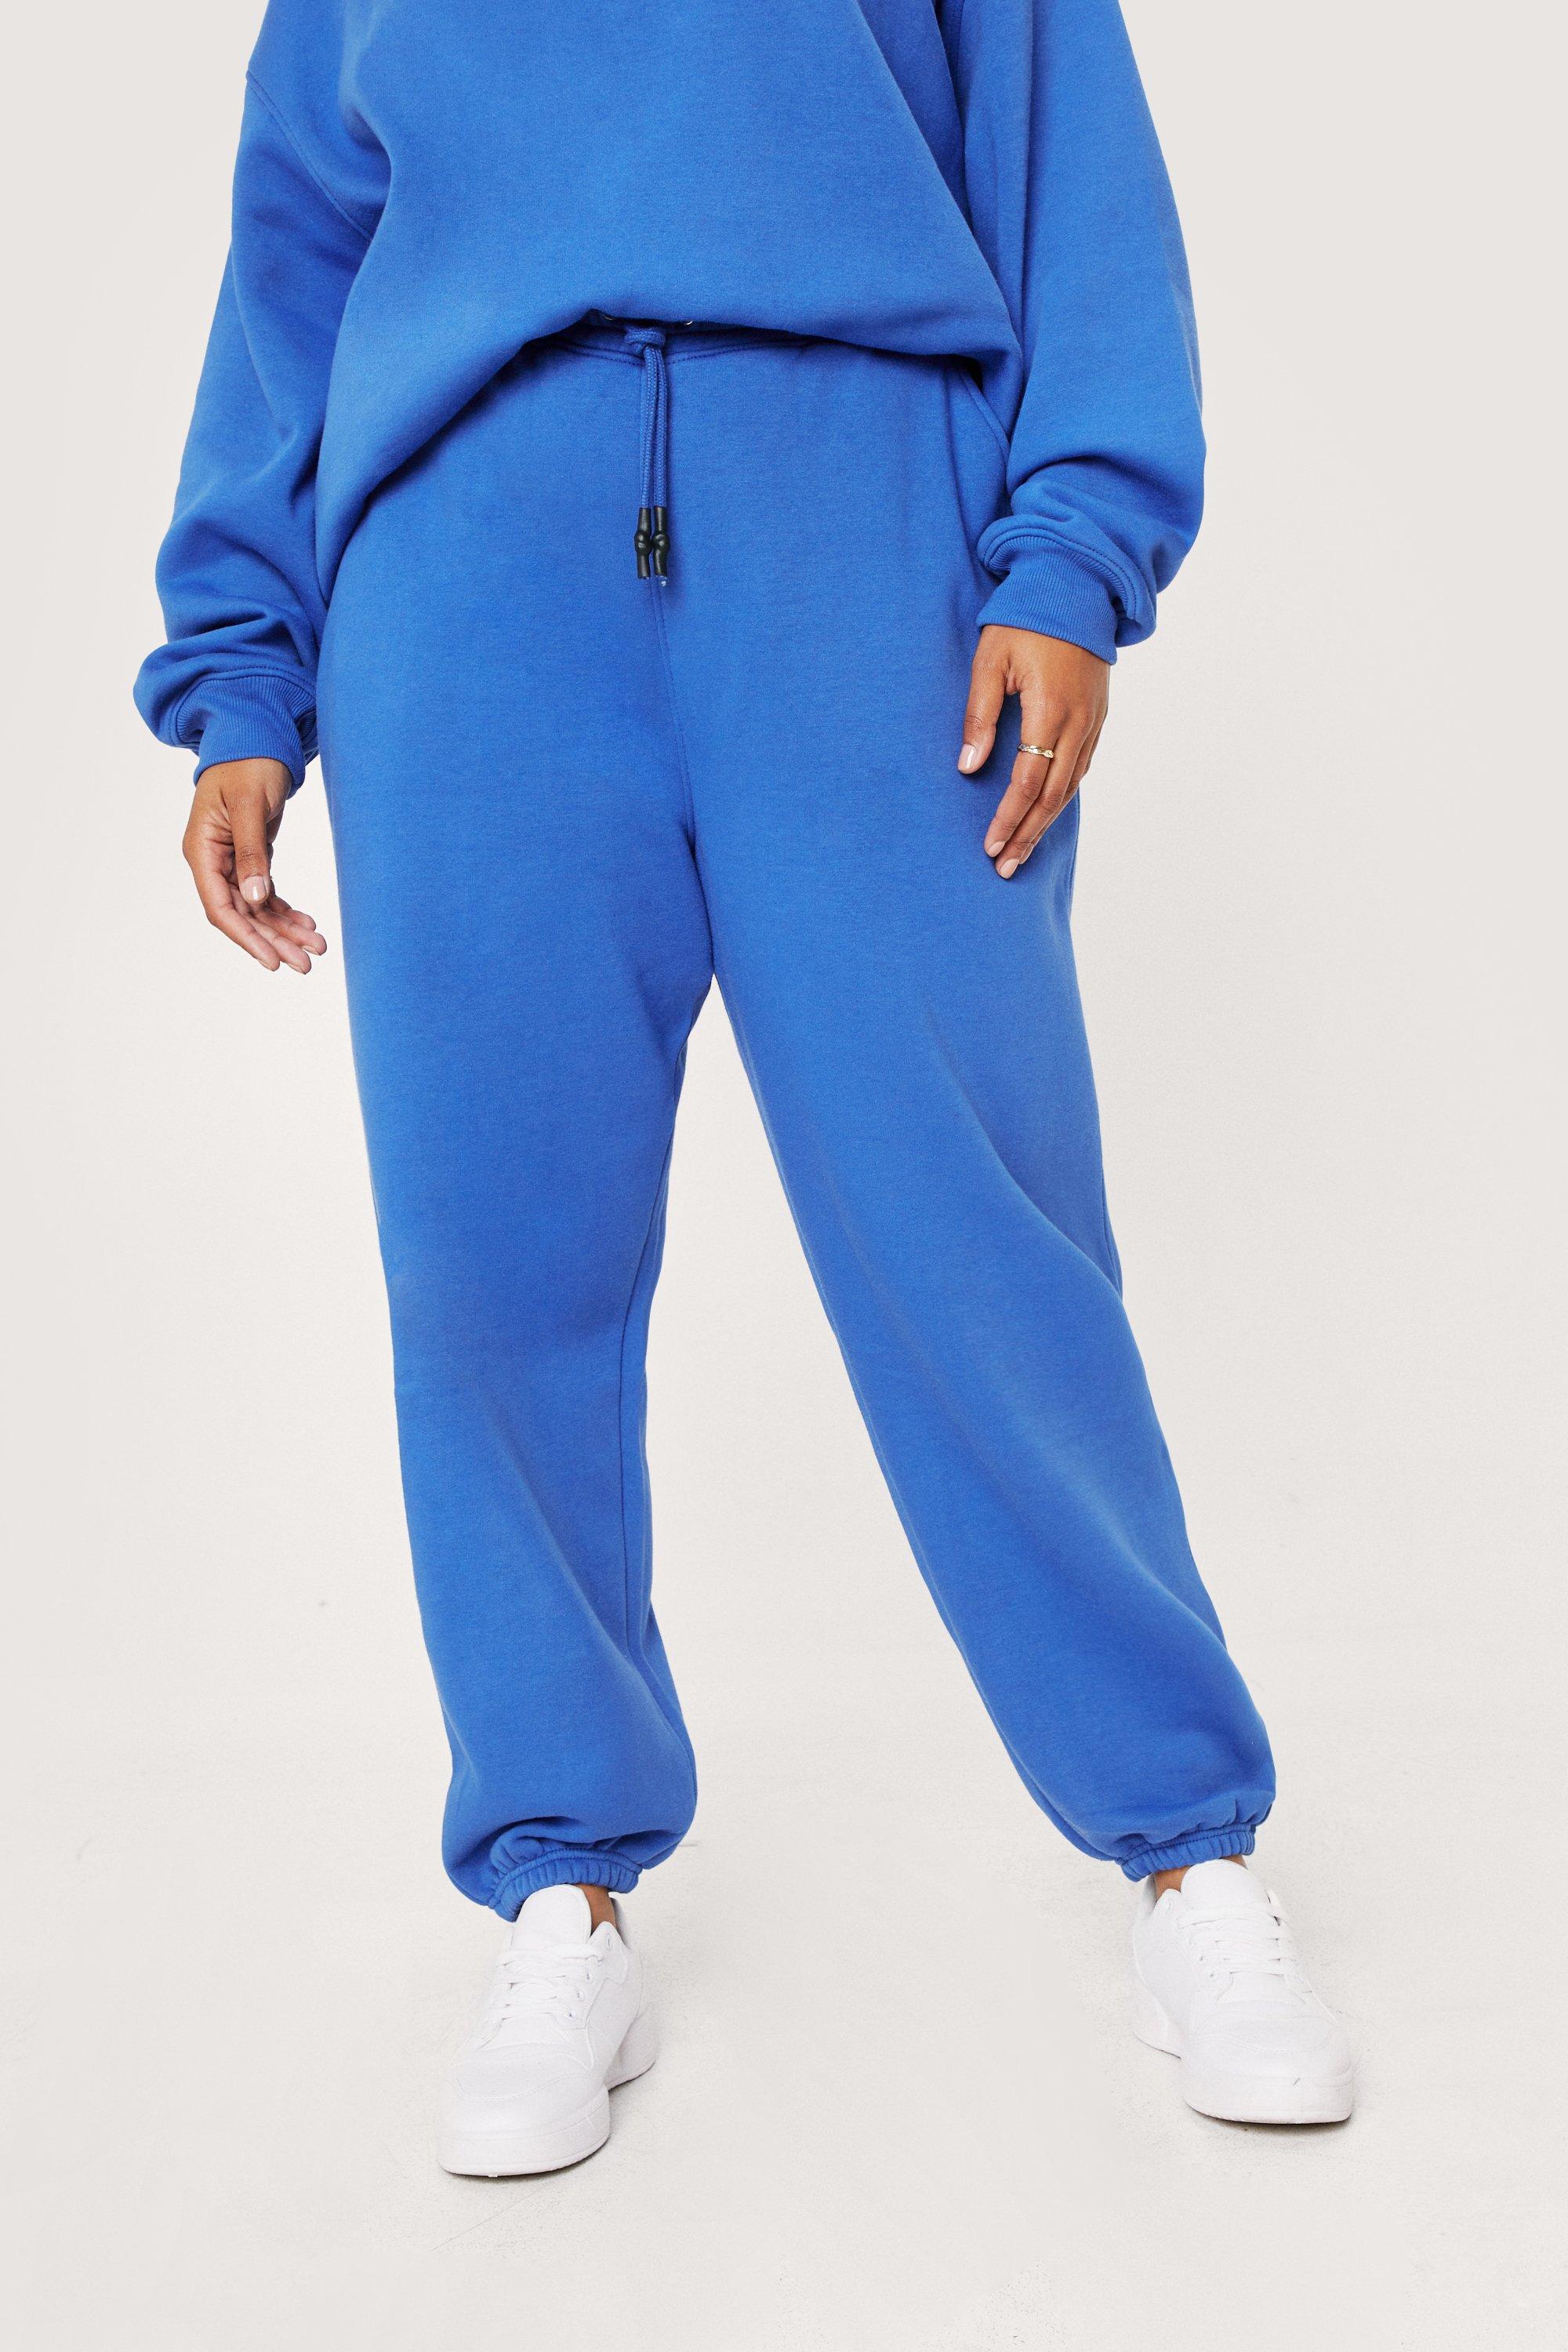 Woman Drawstring Pocket Sweatpants Available in Plus Size 